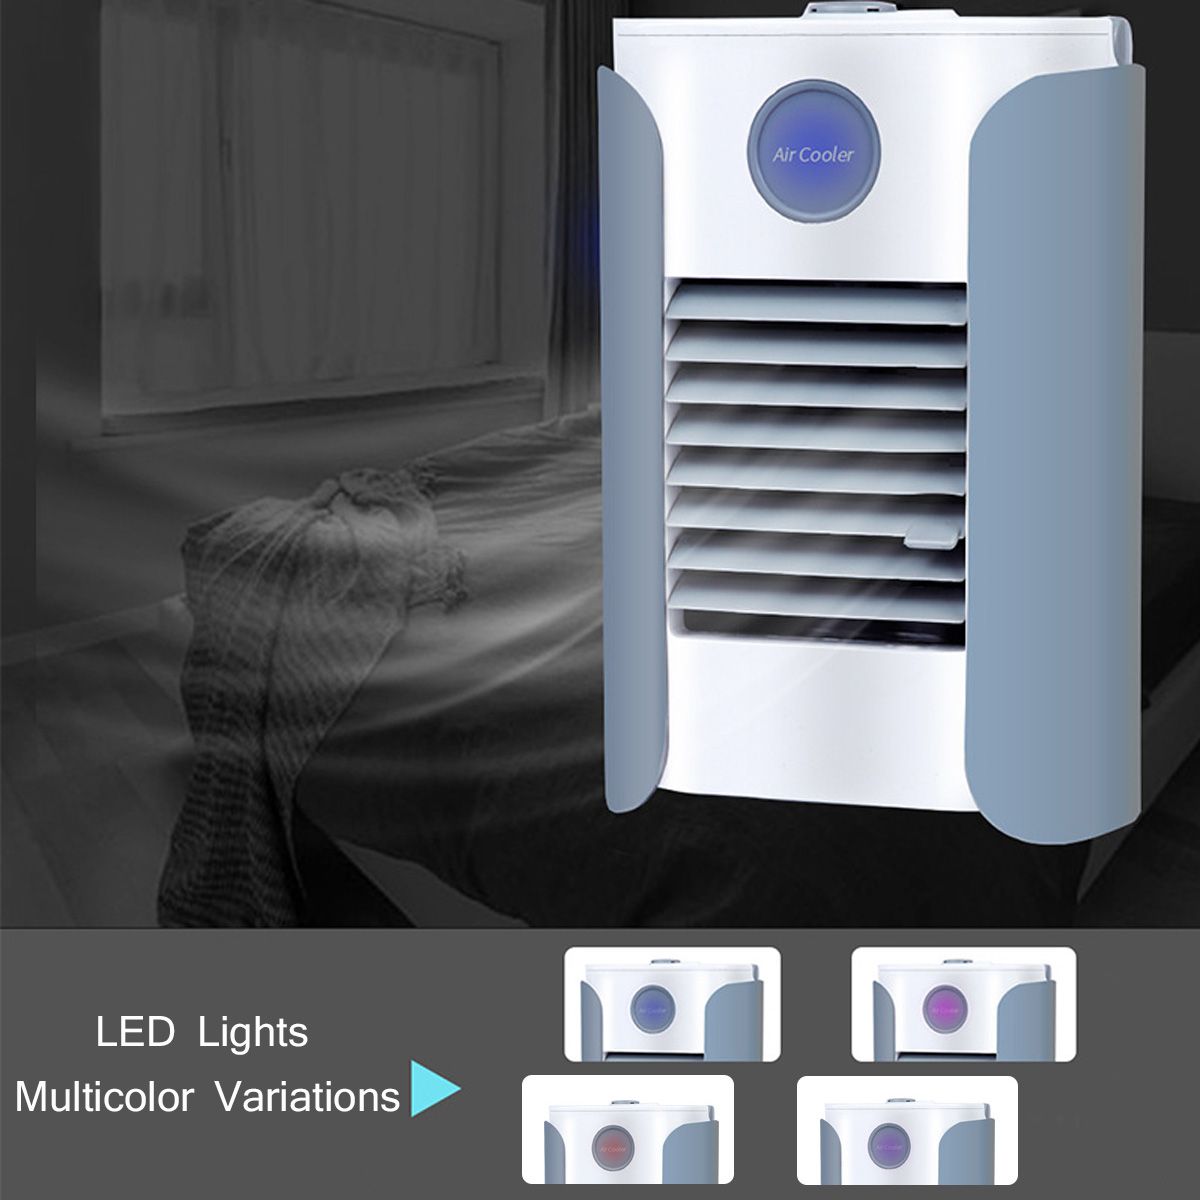 USB-Multifunction-Humidifier-Portable-Air-Conditioner-Fan-Cooling-bluetooth-Speaker-Gifts-for-Family-1675300